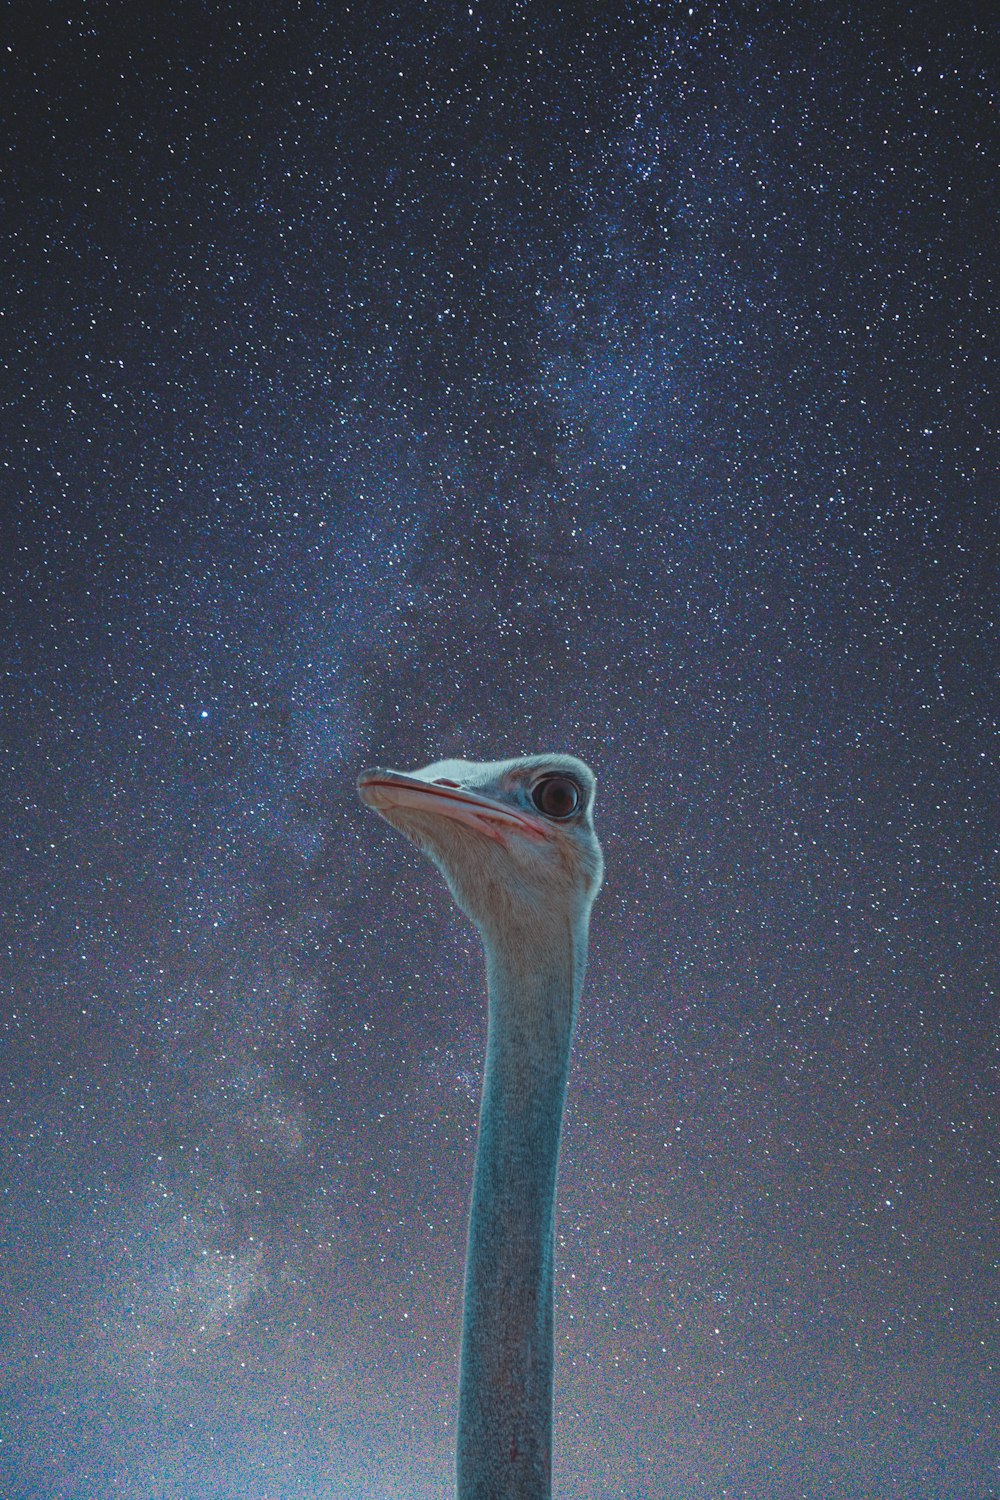 an ostrich looks up at the night sky